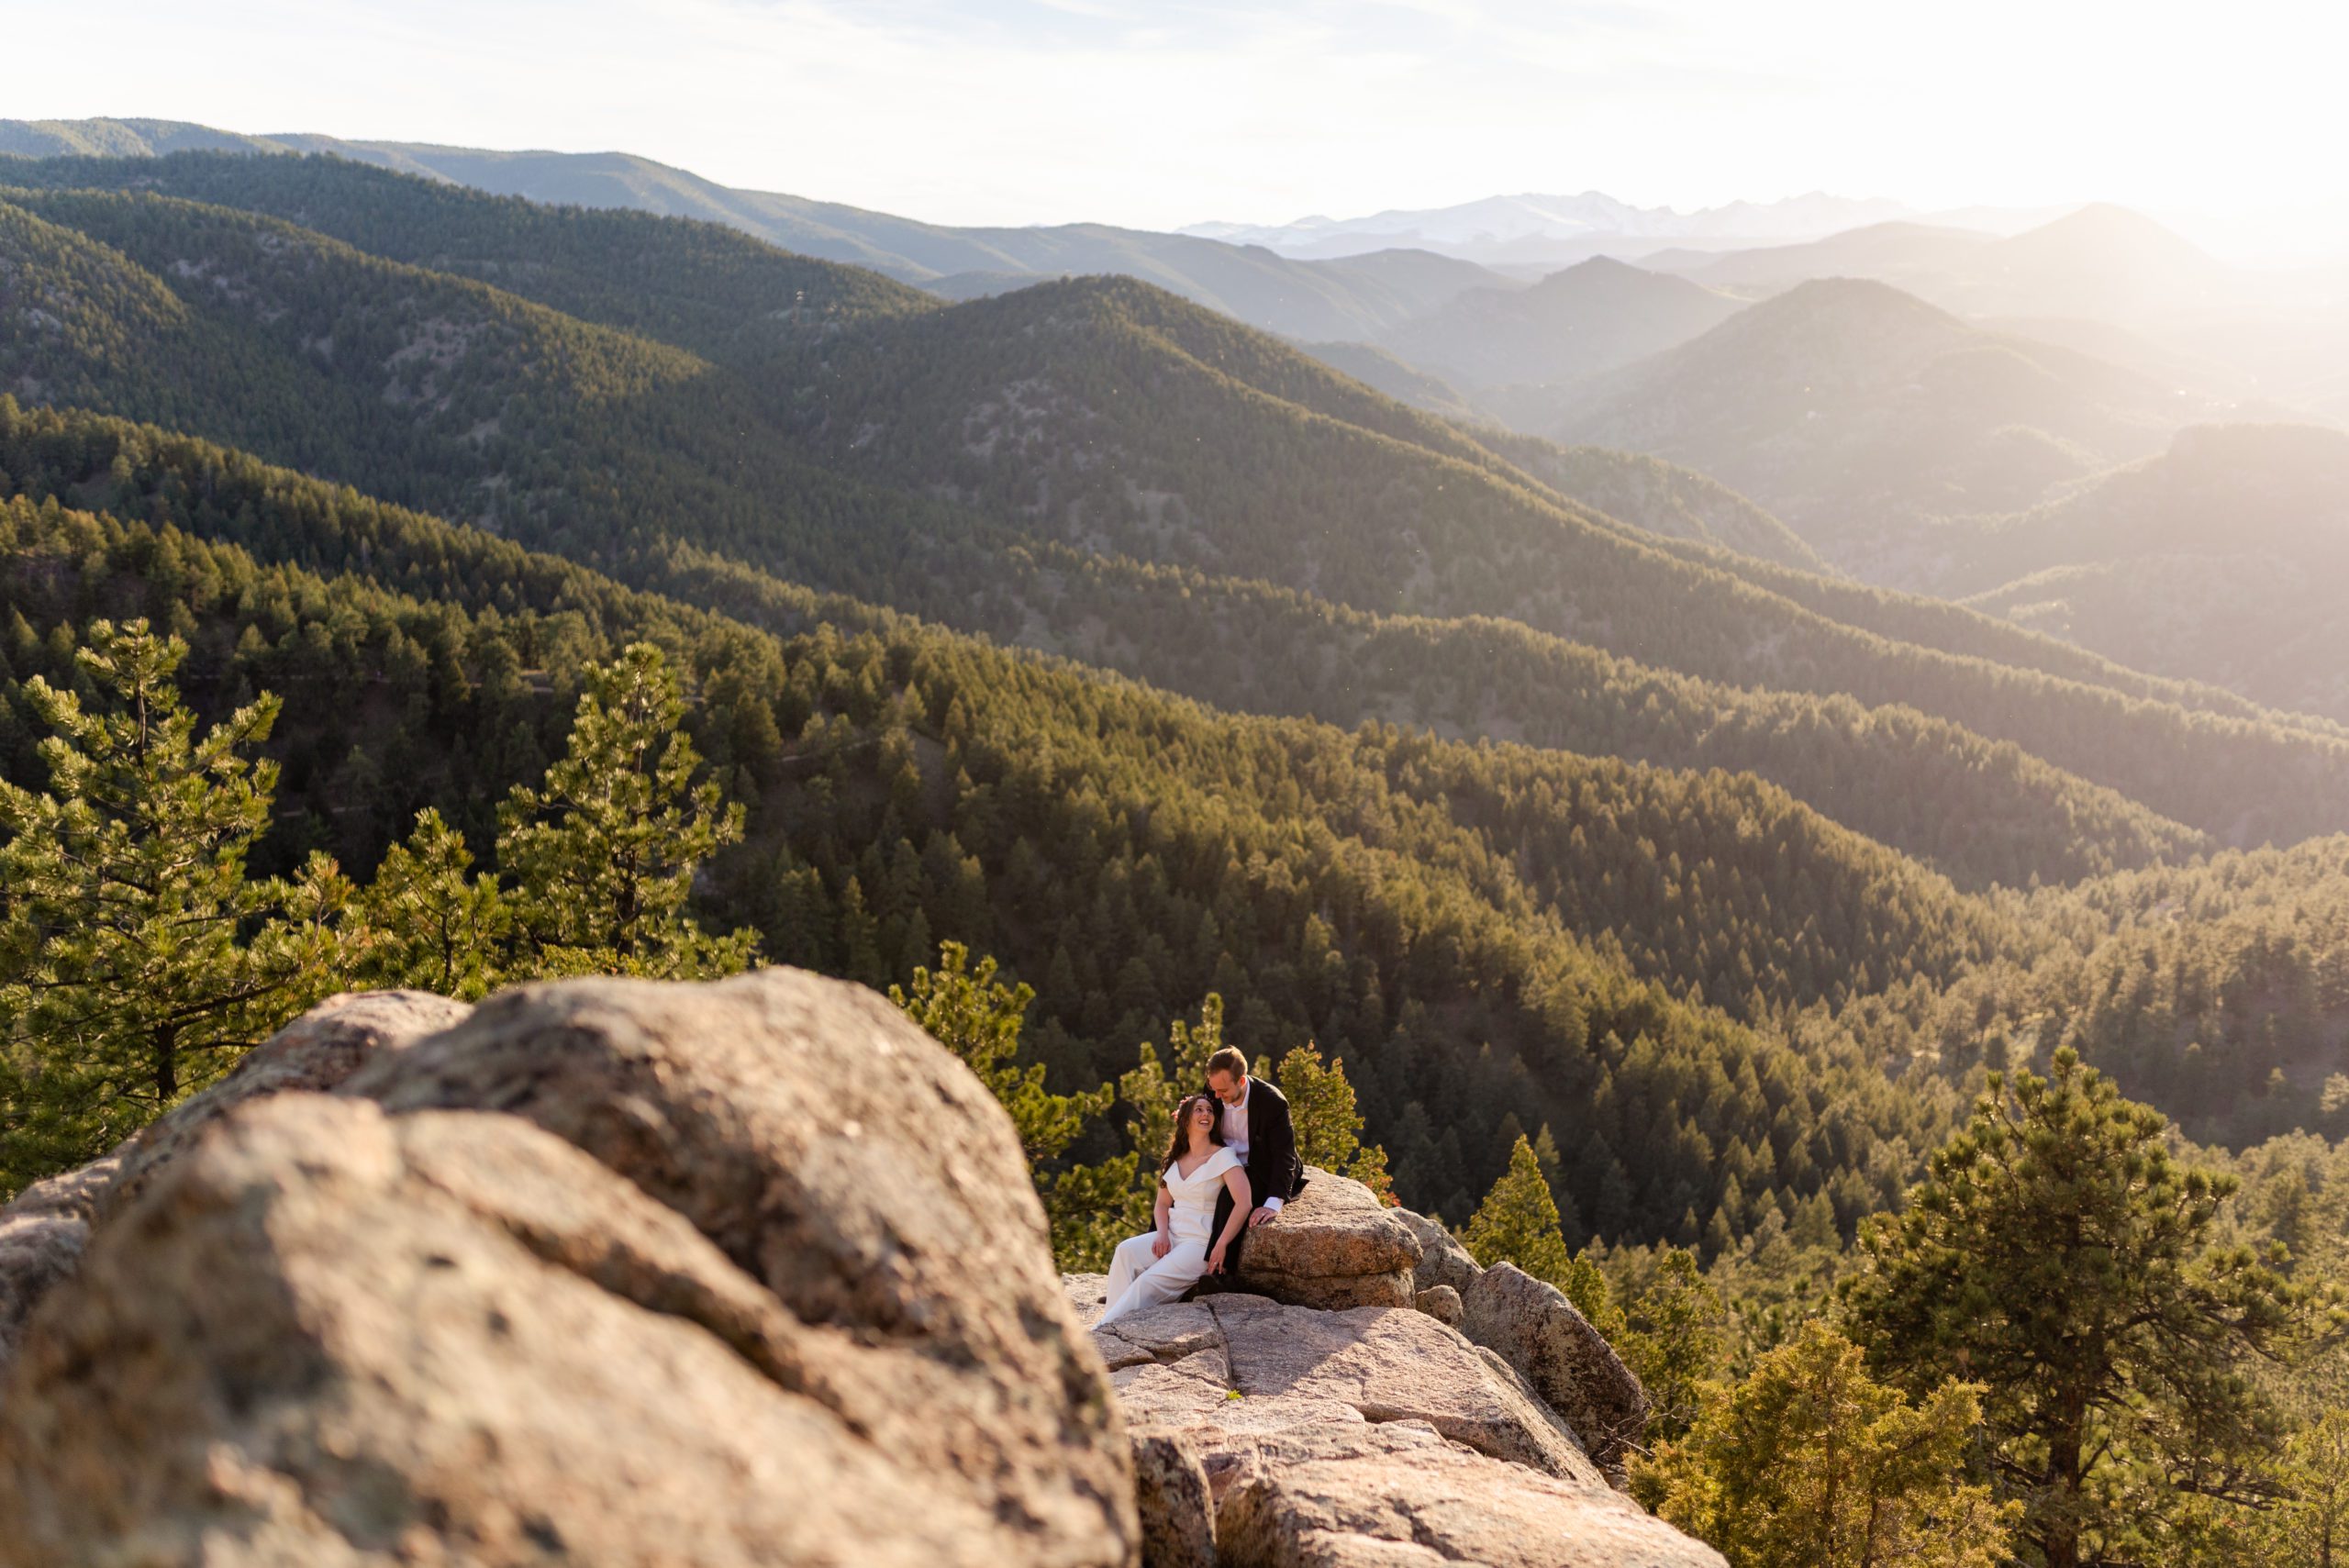 A shot of the couple among the gorgeous green valley of tress below during their Boulder hiking elopement near realization point.